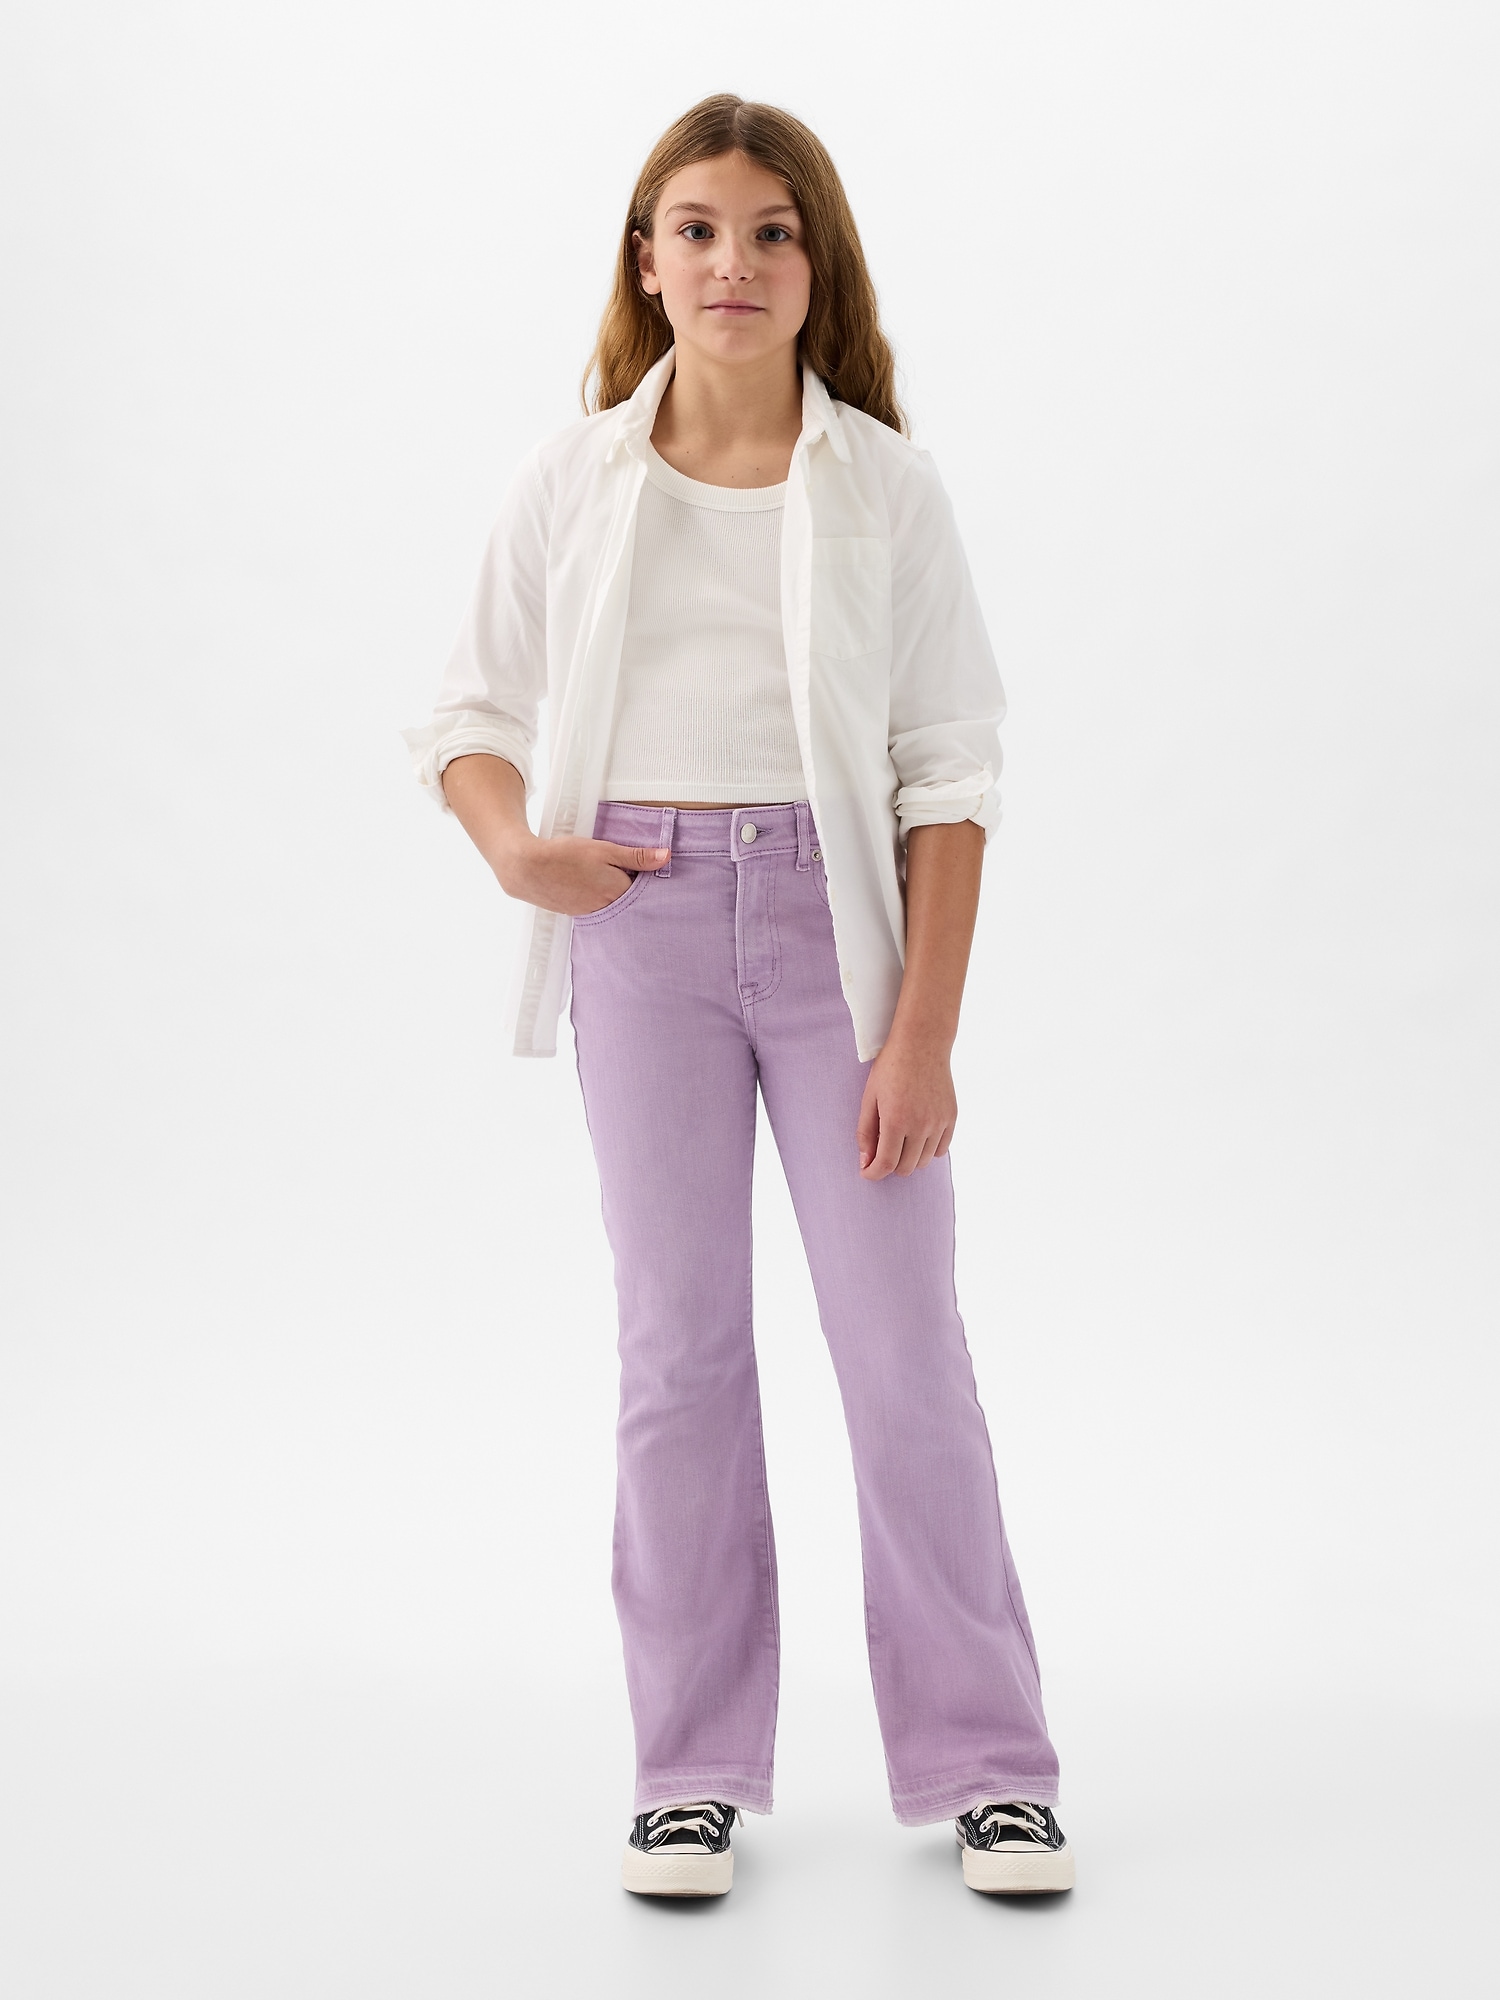 Kids High Rise '70s Flare Jeans | Gap